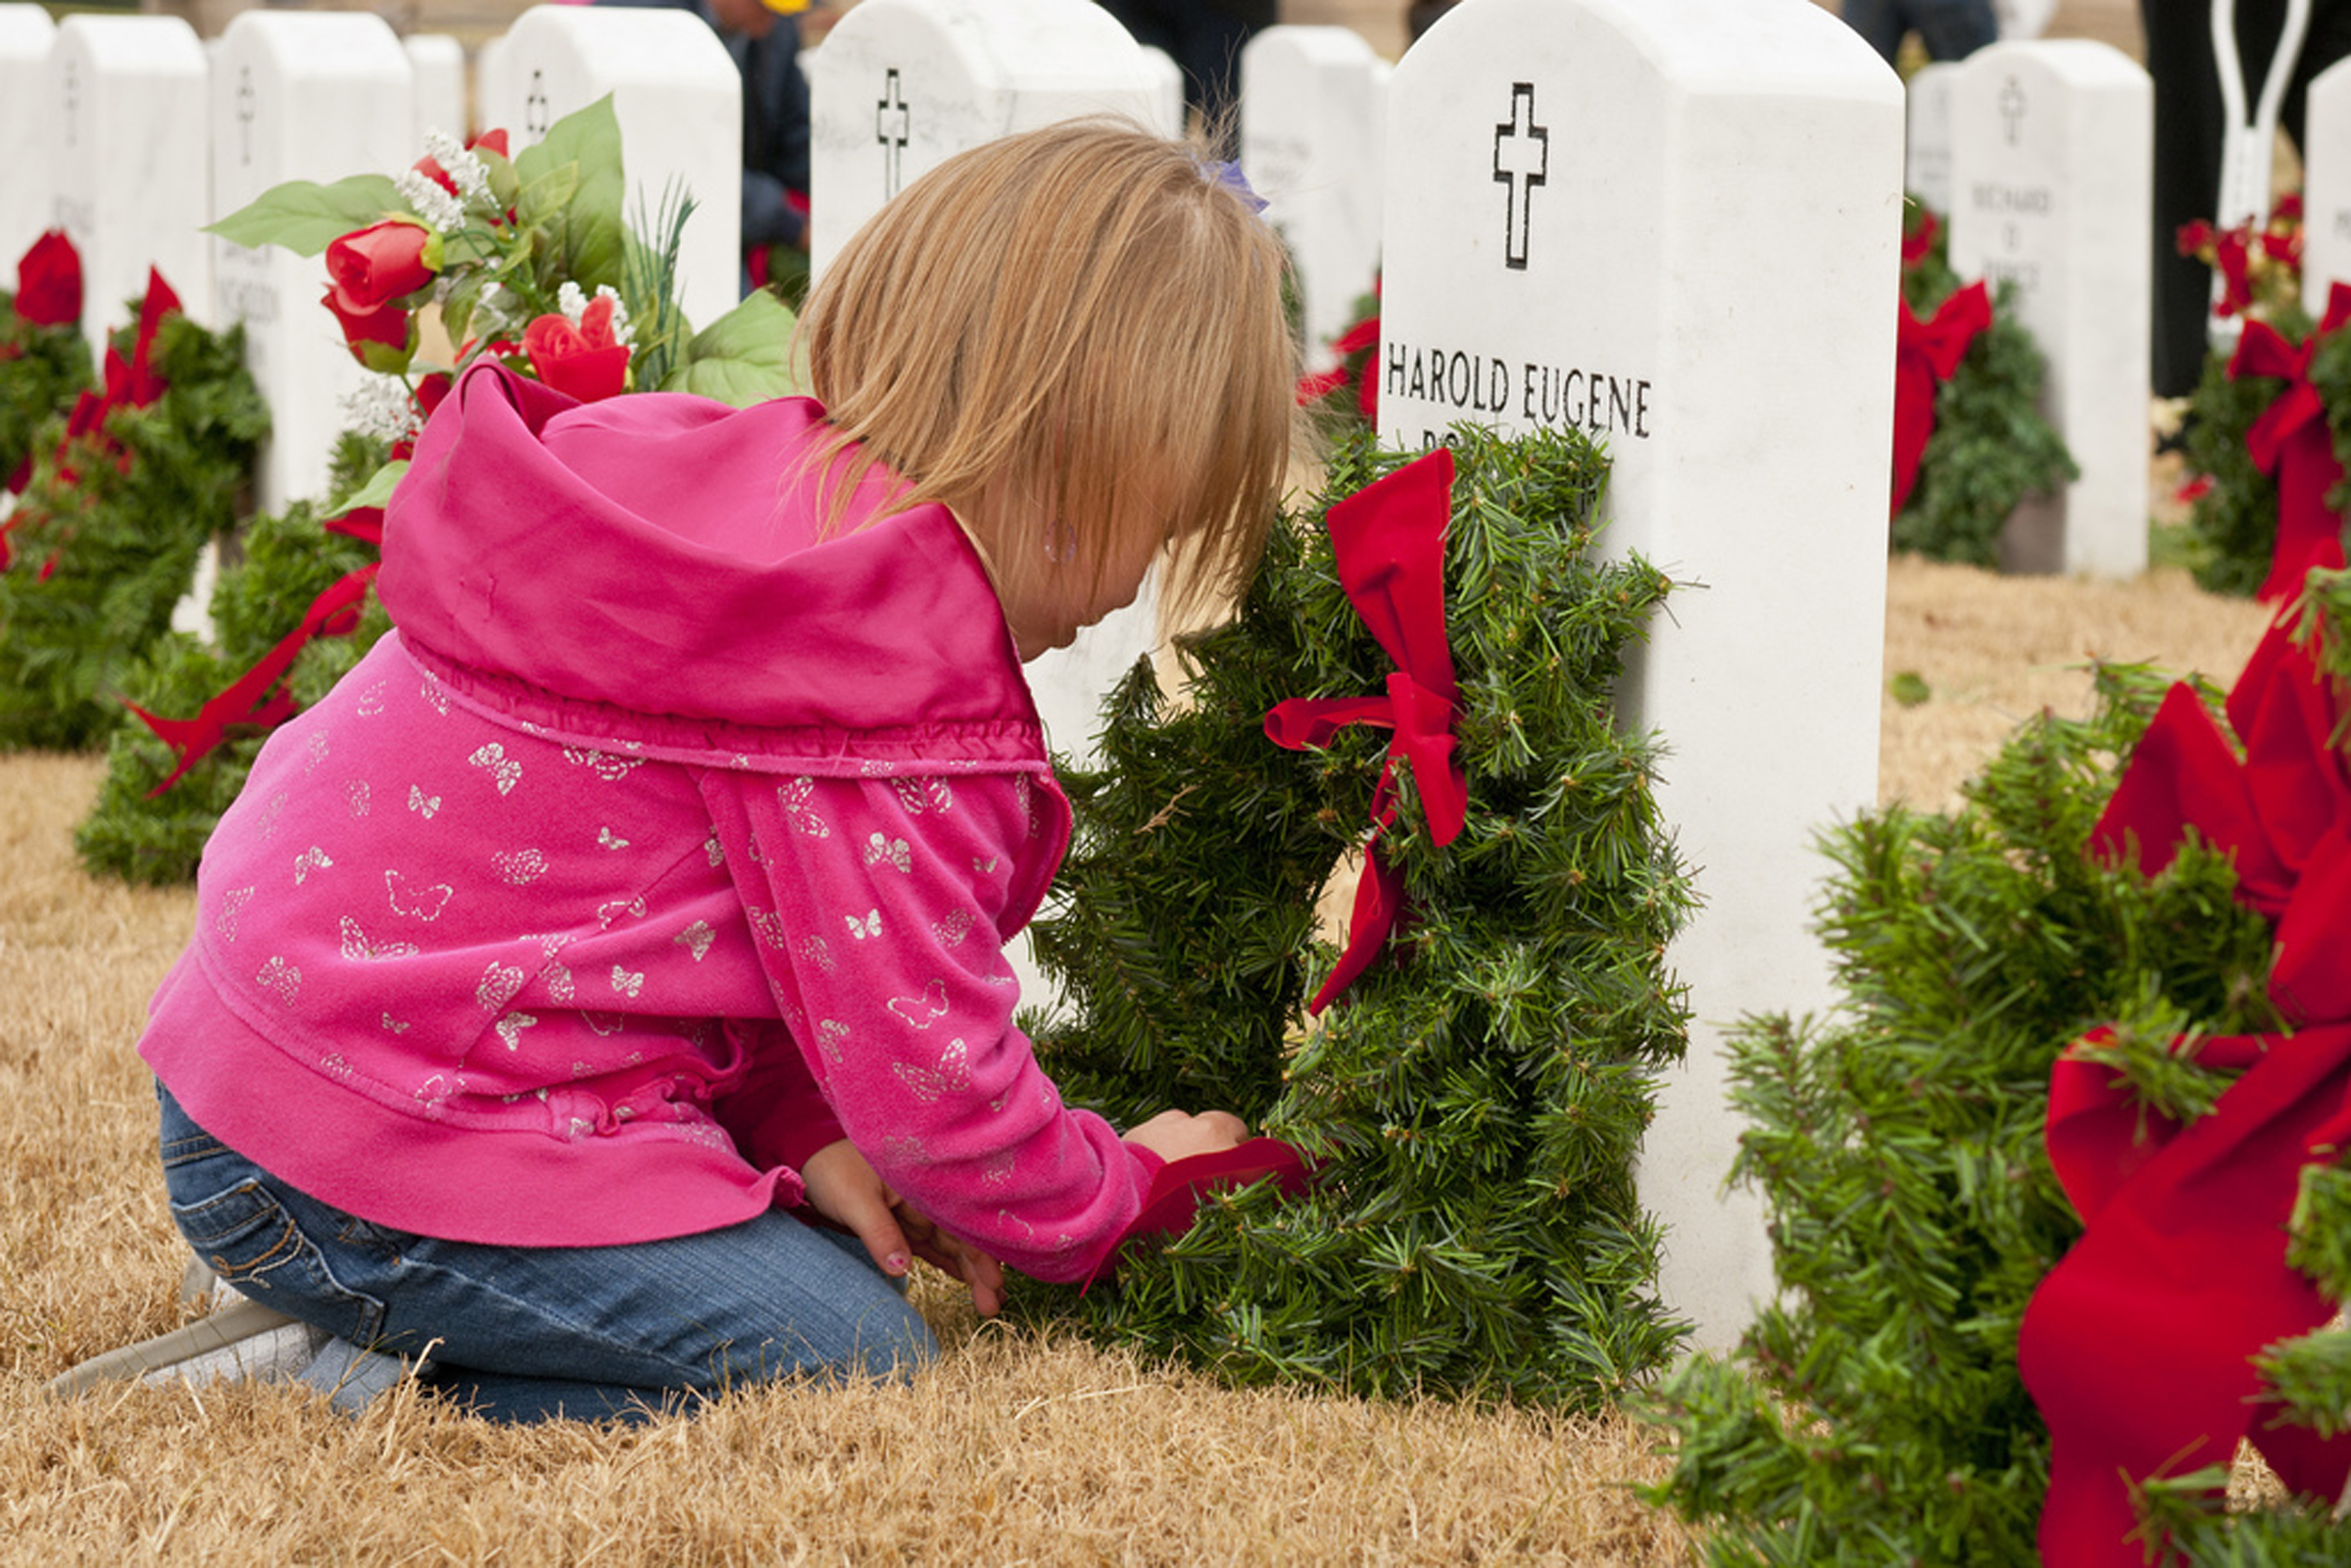 YOUNG GIRL AT GRAVE